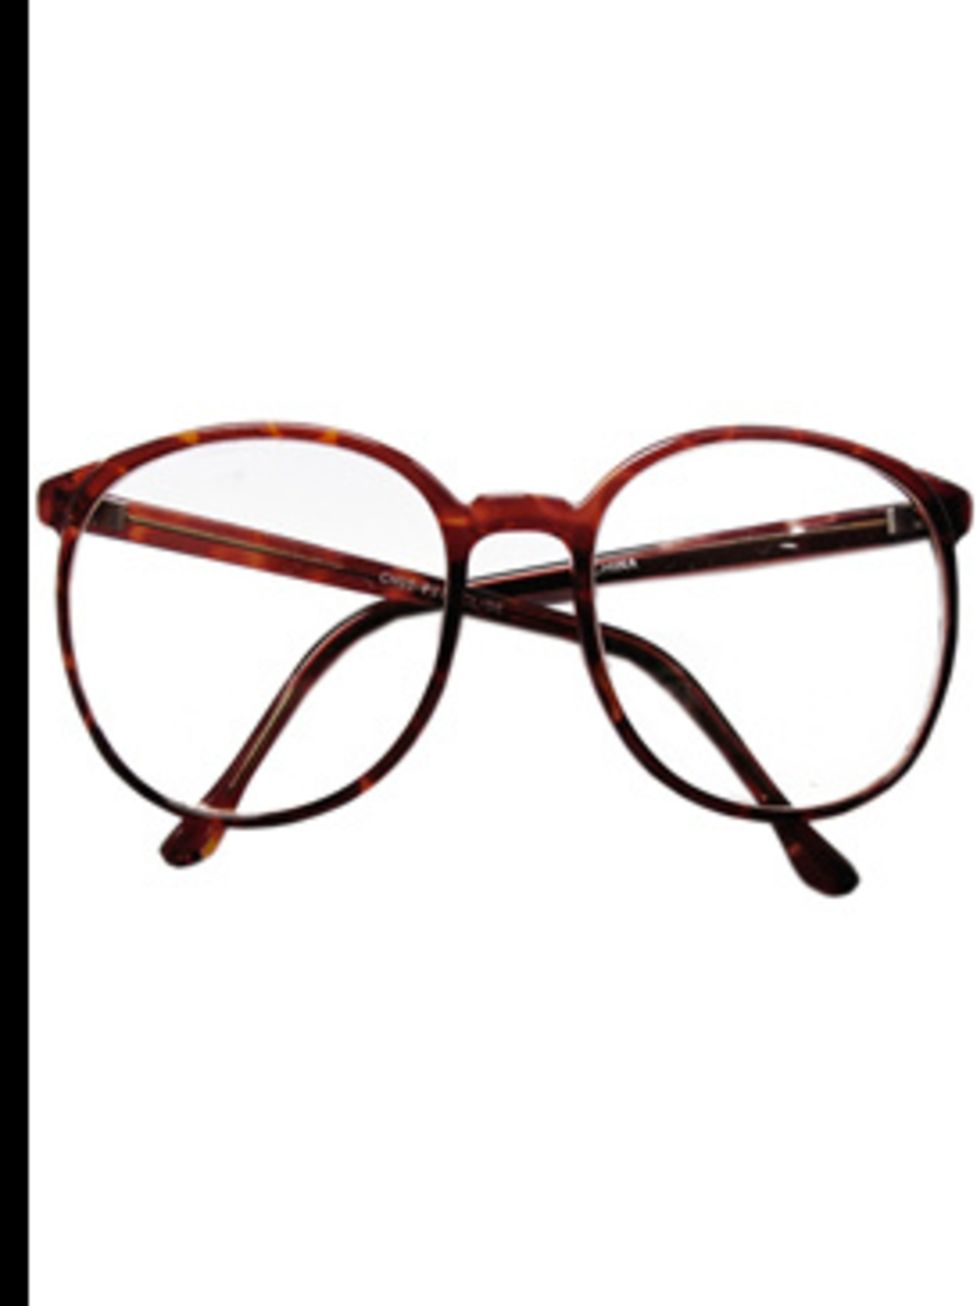 <p>Tortoise print glasses, £14, by <a href="http://www.lazyoaf.co.uk/product_info.php?cPath=72_83&amp;products_id=1295">Lazy Oaf</a></p>